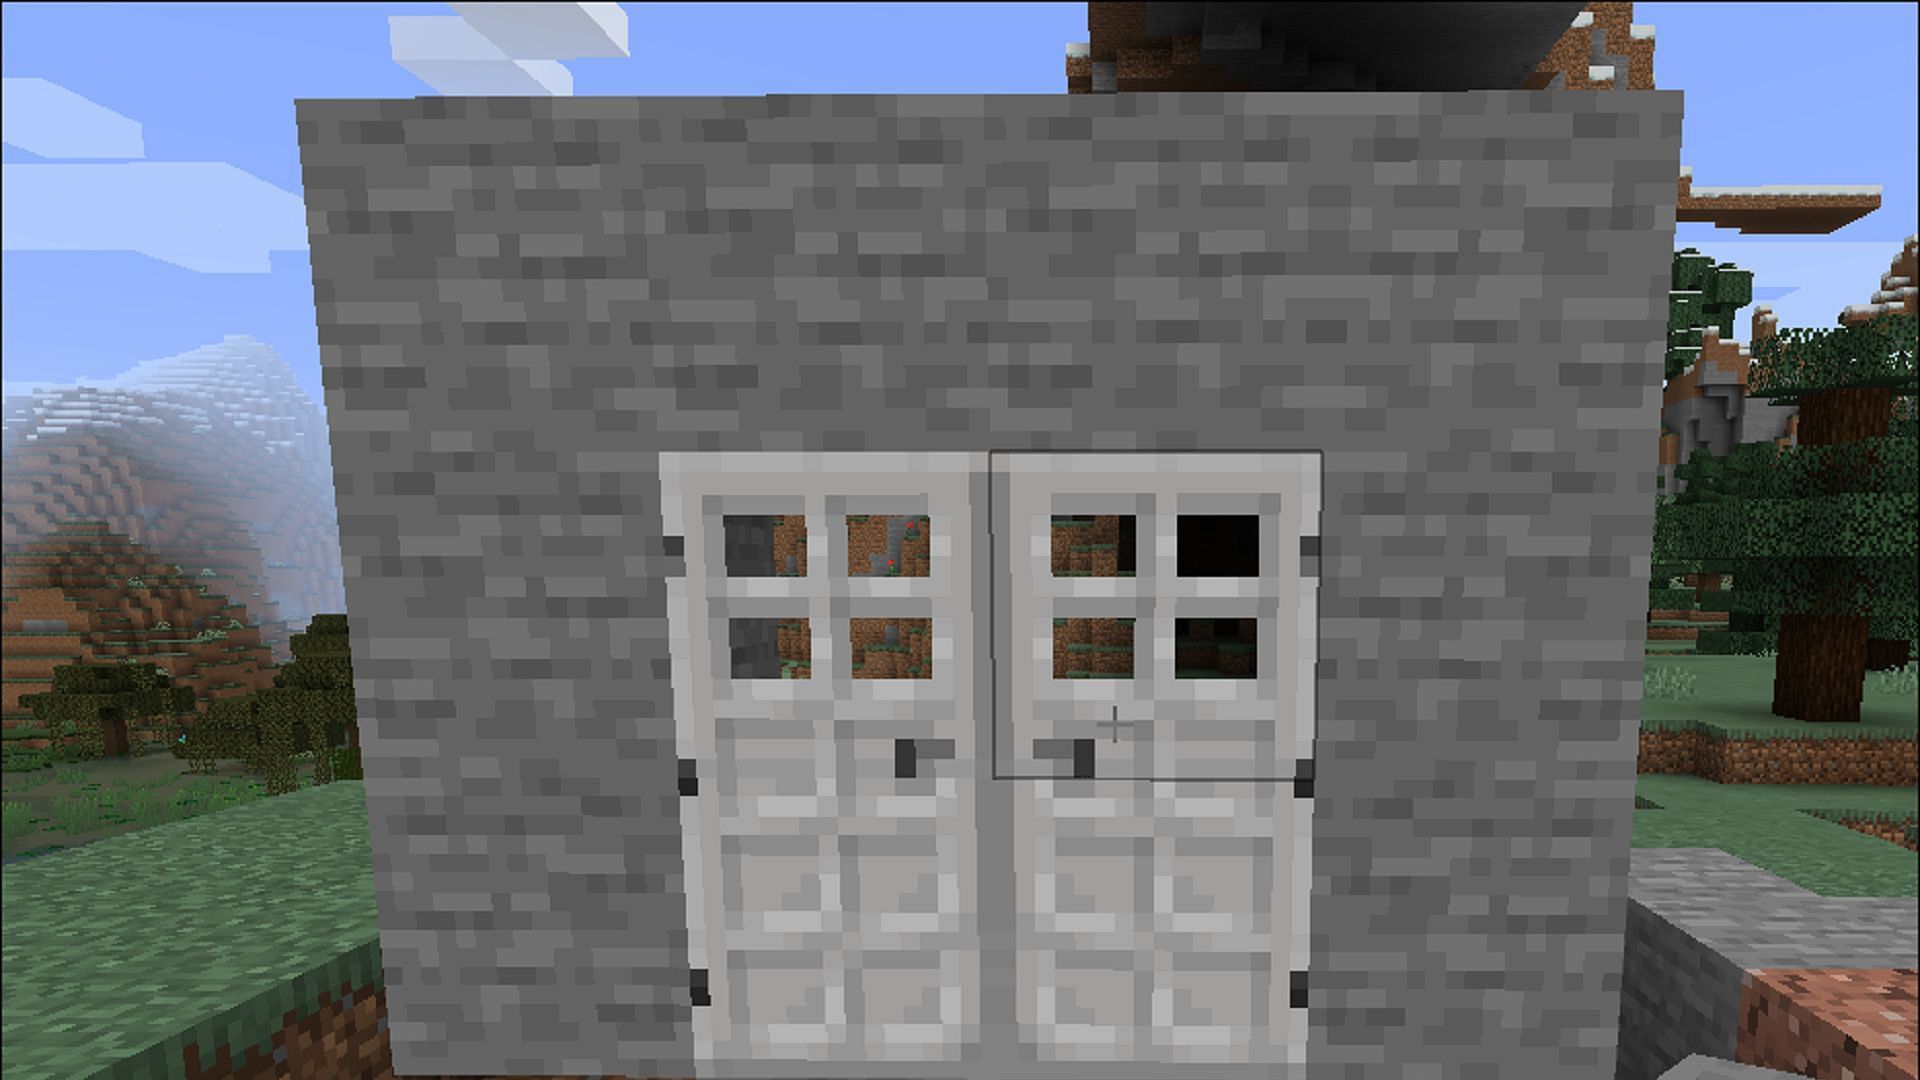 Iron doors provide better security than wood doors in the game (Image via Mojang)